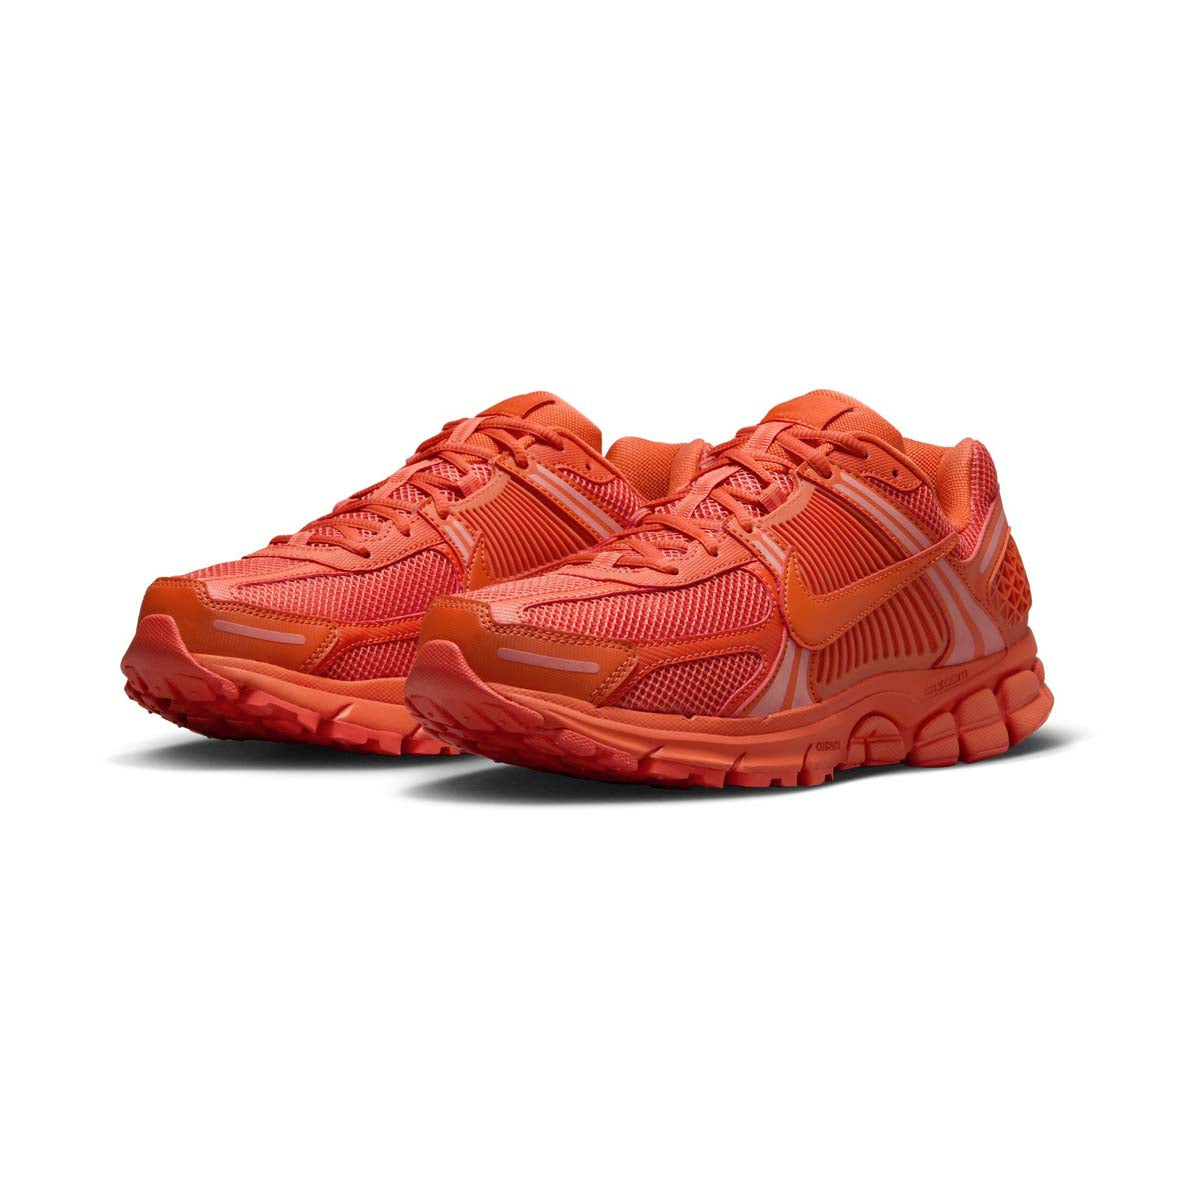 Although developed as Ons flagship running shoe